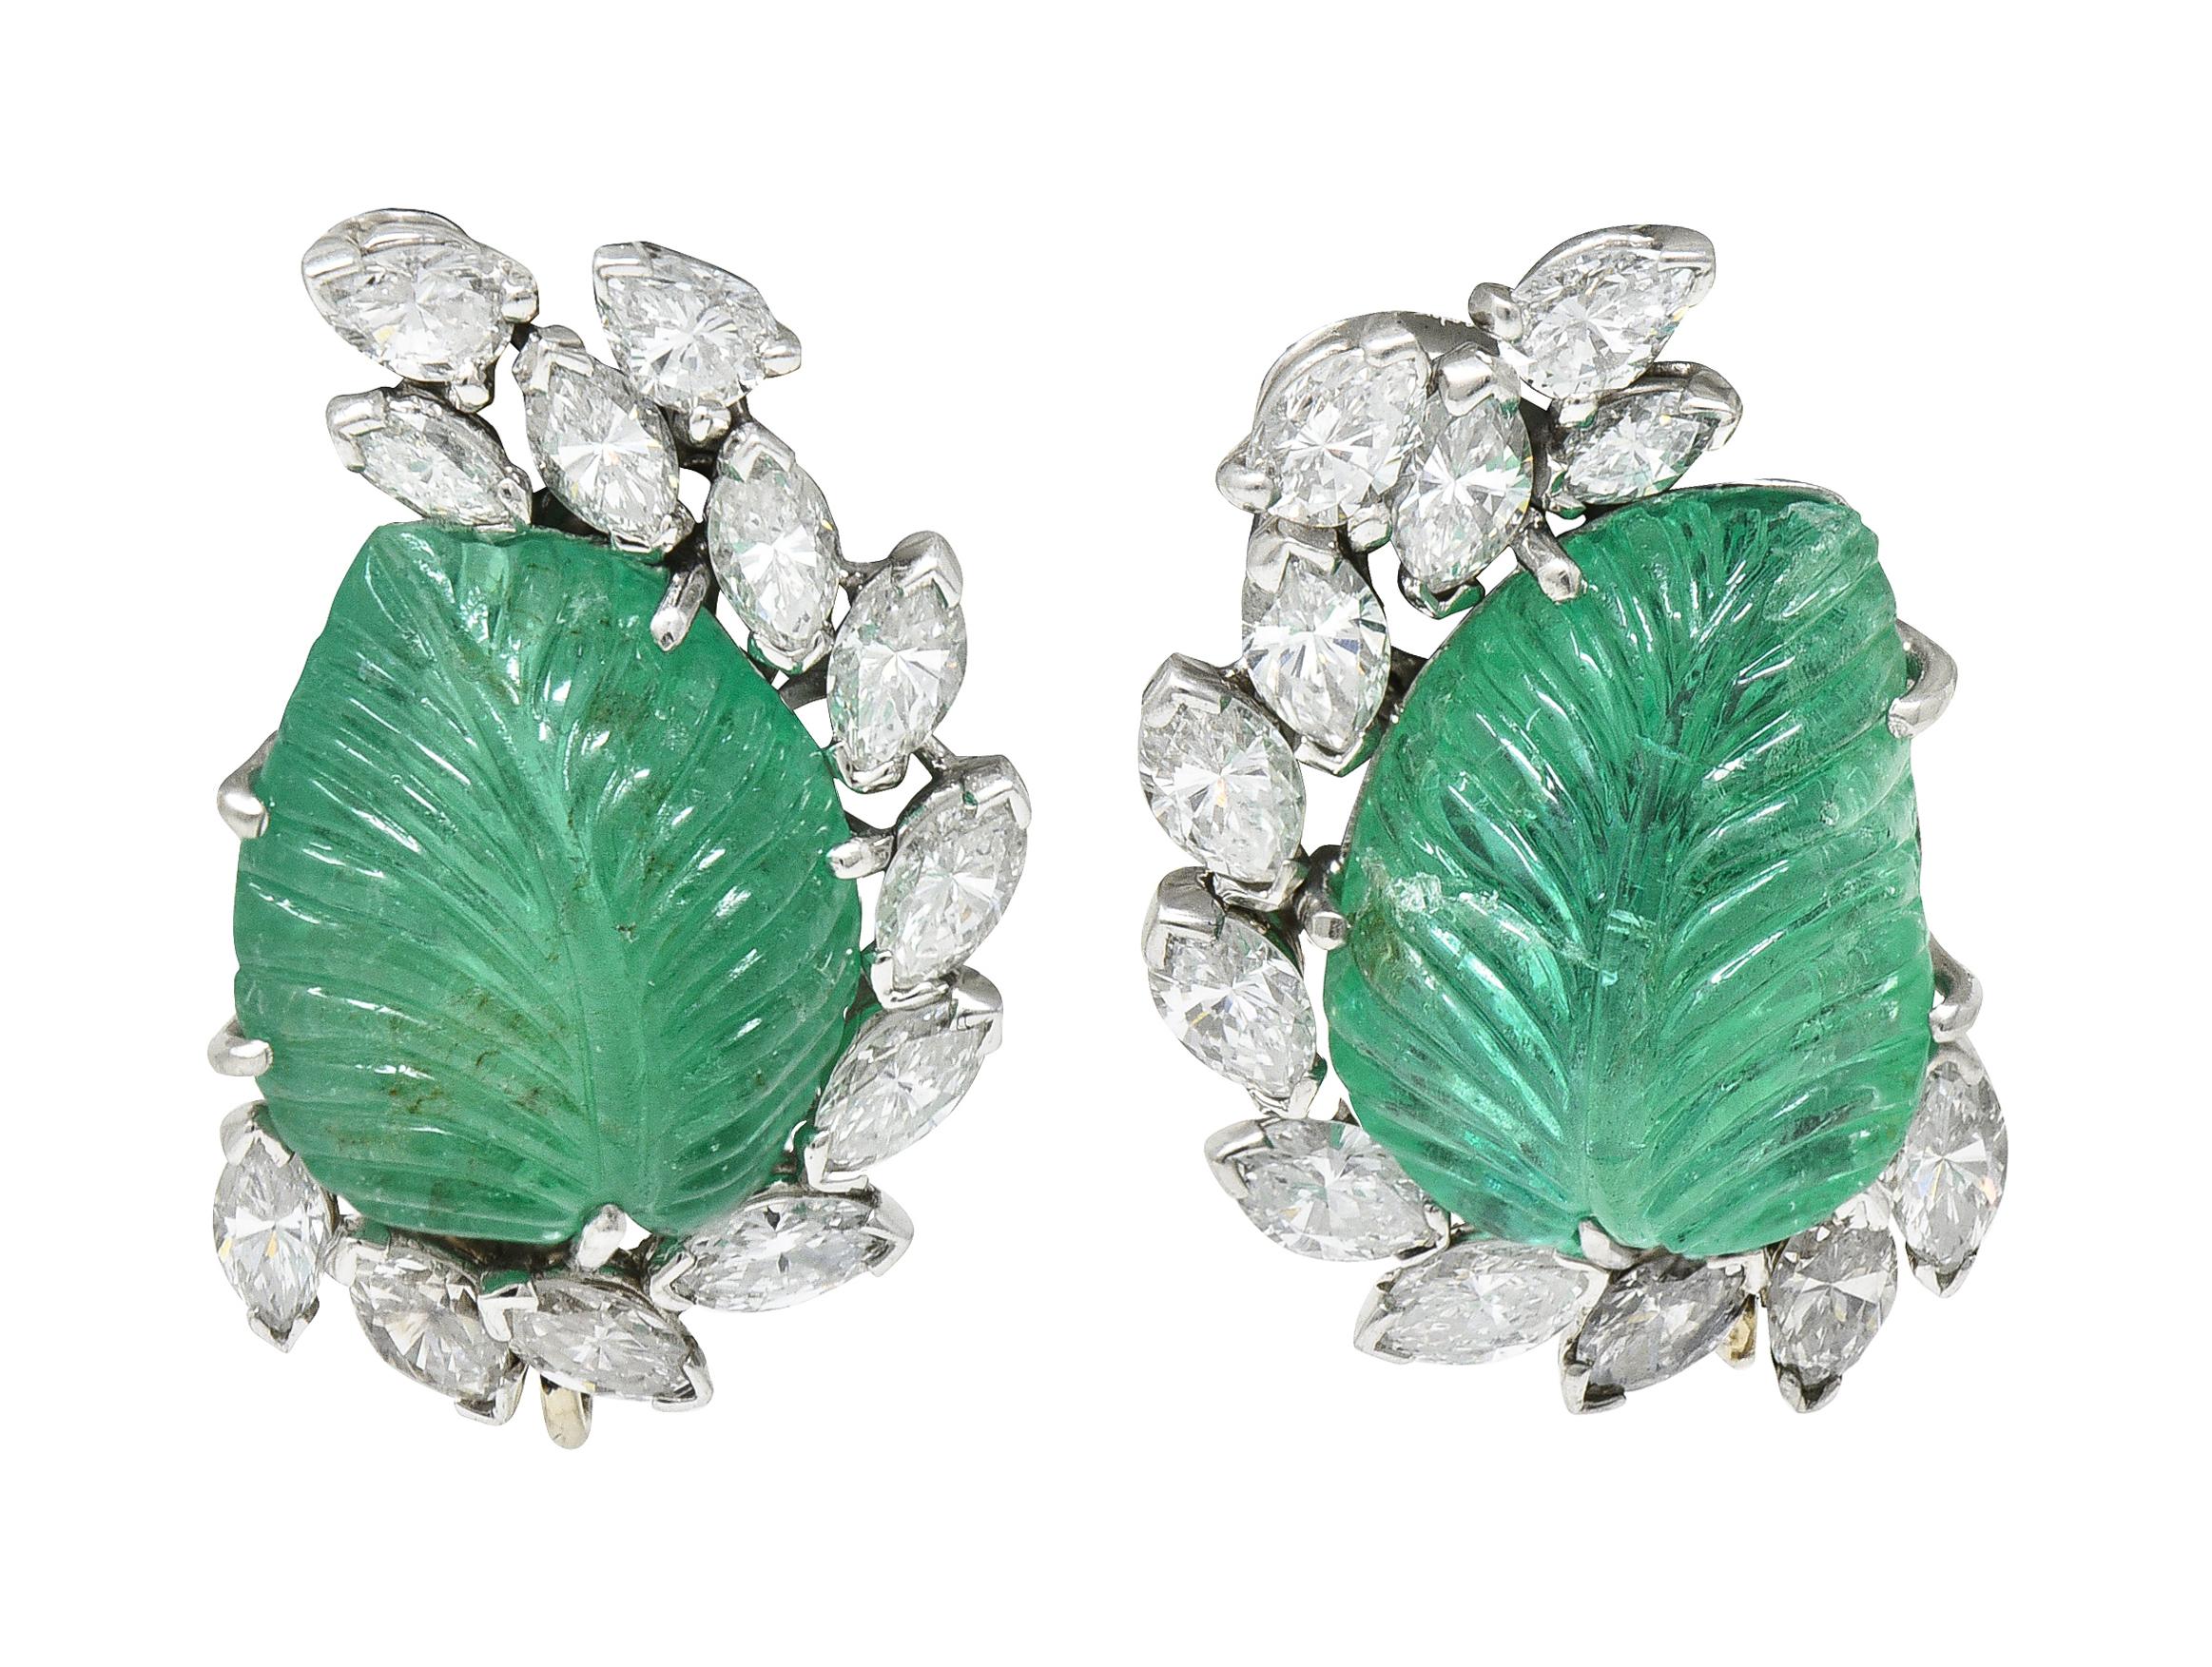 Cluster ear-clips are designed to feature Mughal carved emerald with a half halo of marquise and pear cut diamonds

Emerald is pear shaped and deeply carved to depict a leaf motif while weighing in total approximately 20.00 carats

Very slightly